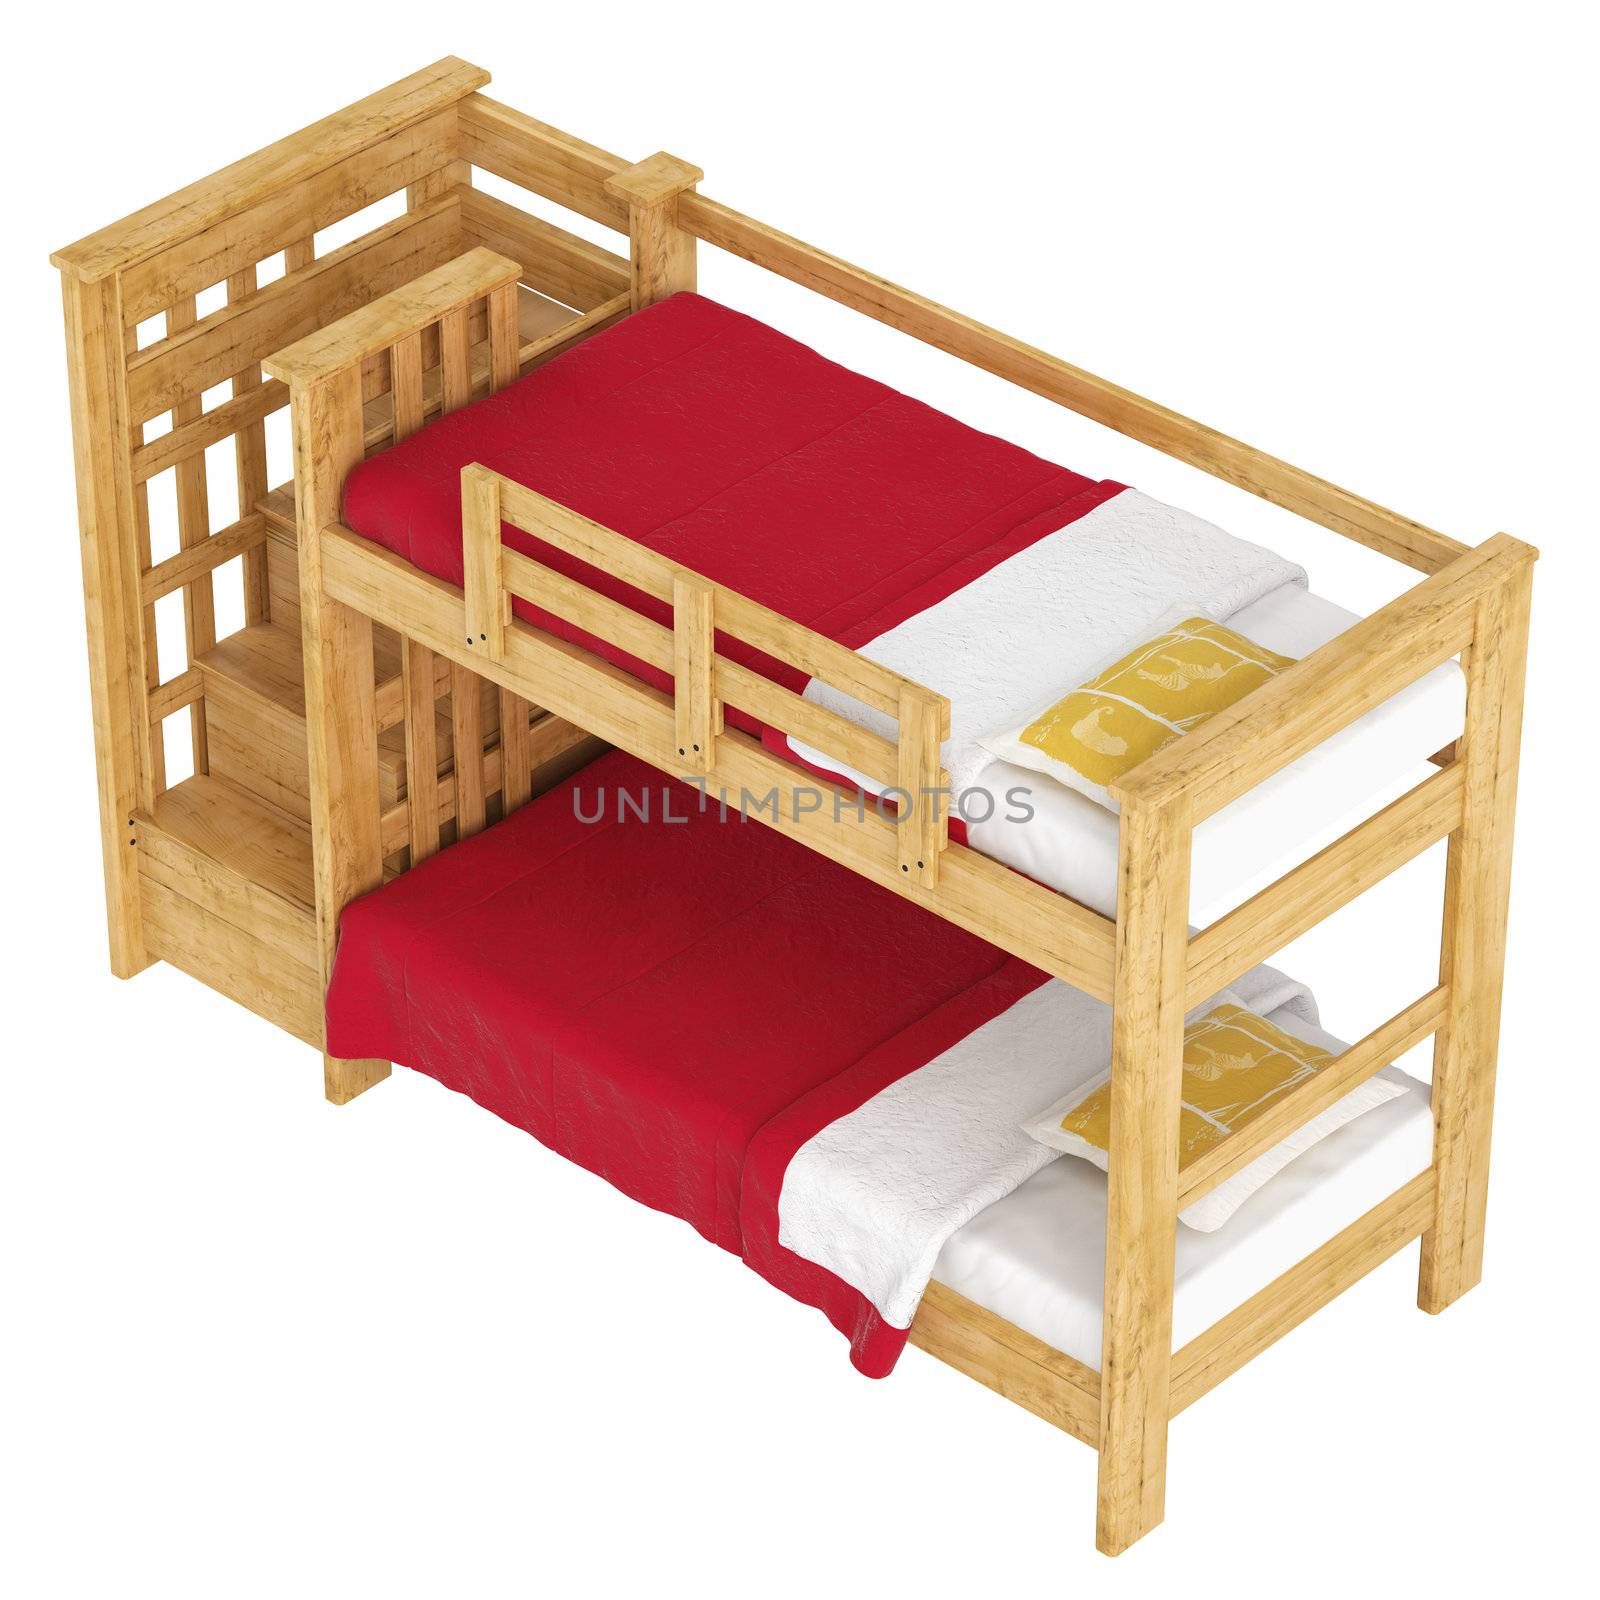 Wooden double bunk bed with a lattice framework and stairs and red bedlinen isolated on white